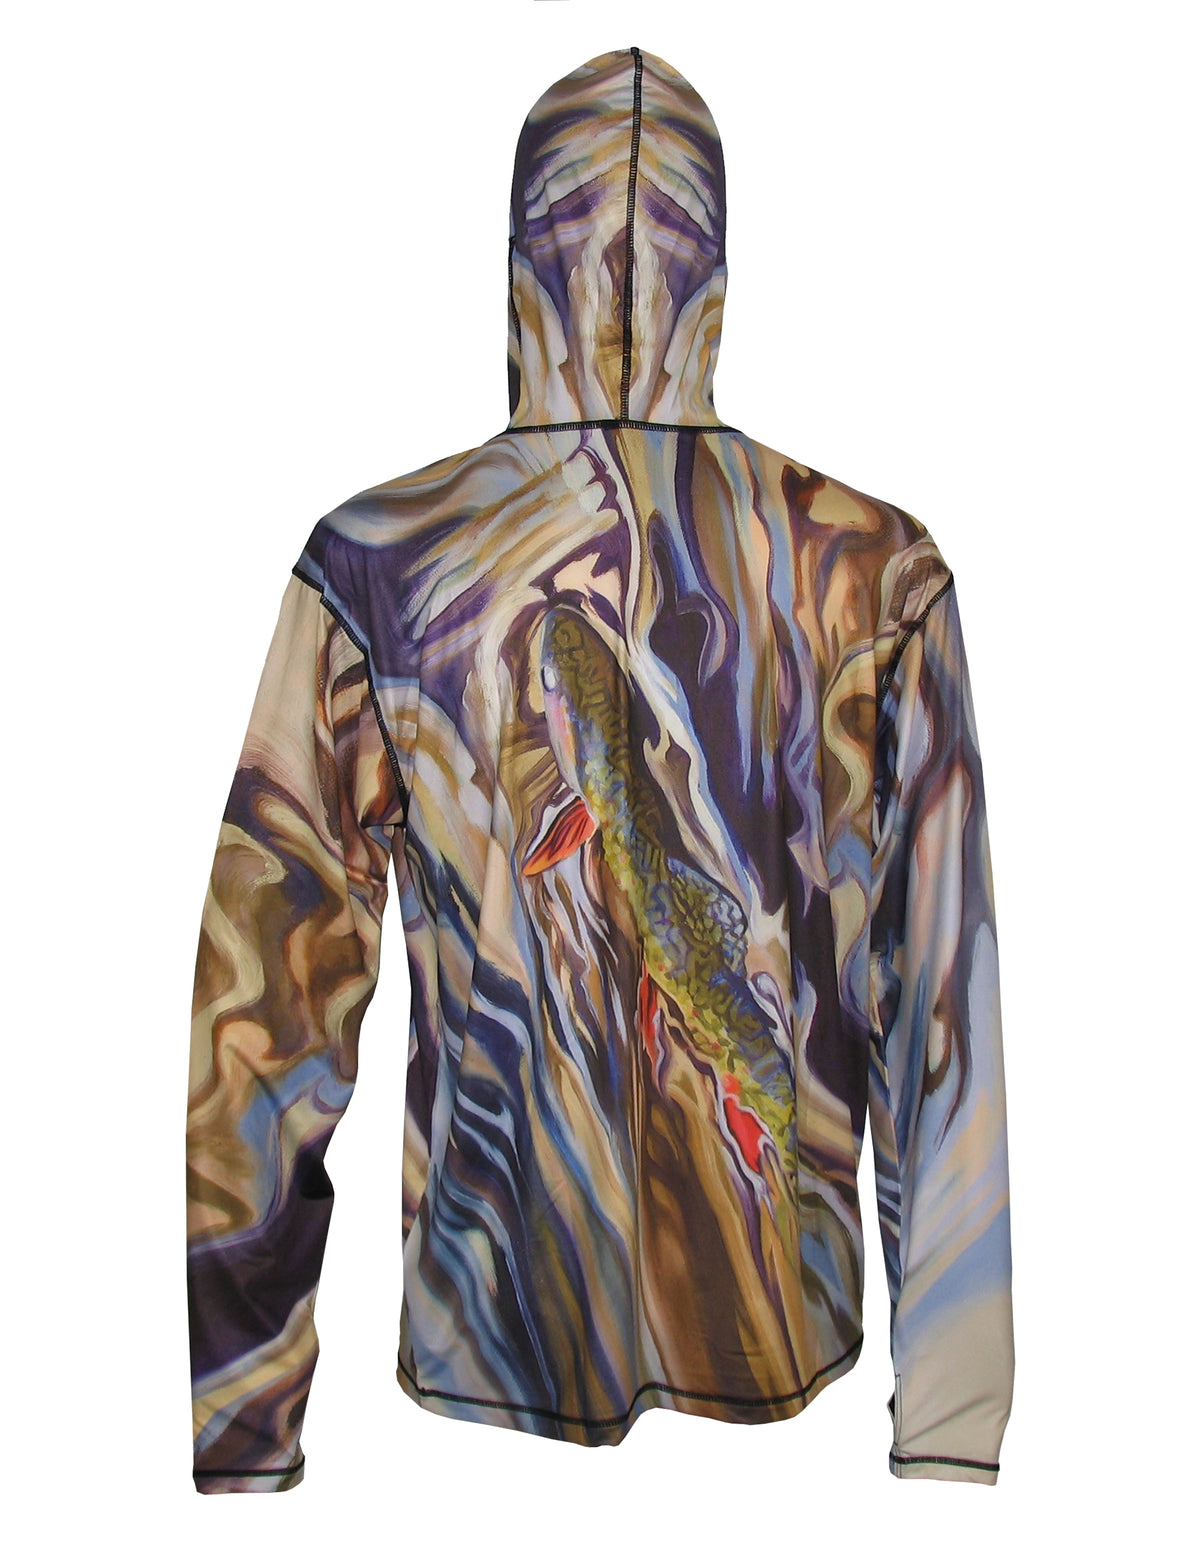 UGV Brook Sunpro fishing hoodie running clothes or on the river fishing clothes offering great sun protection from harmful UV light, while keeping you cool.